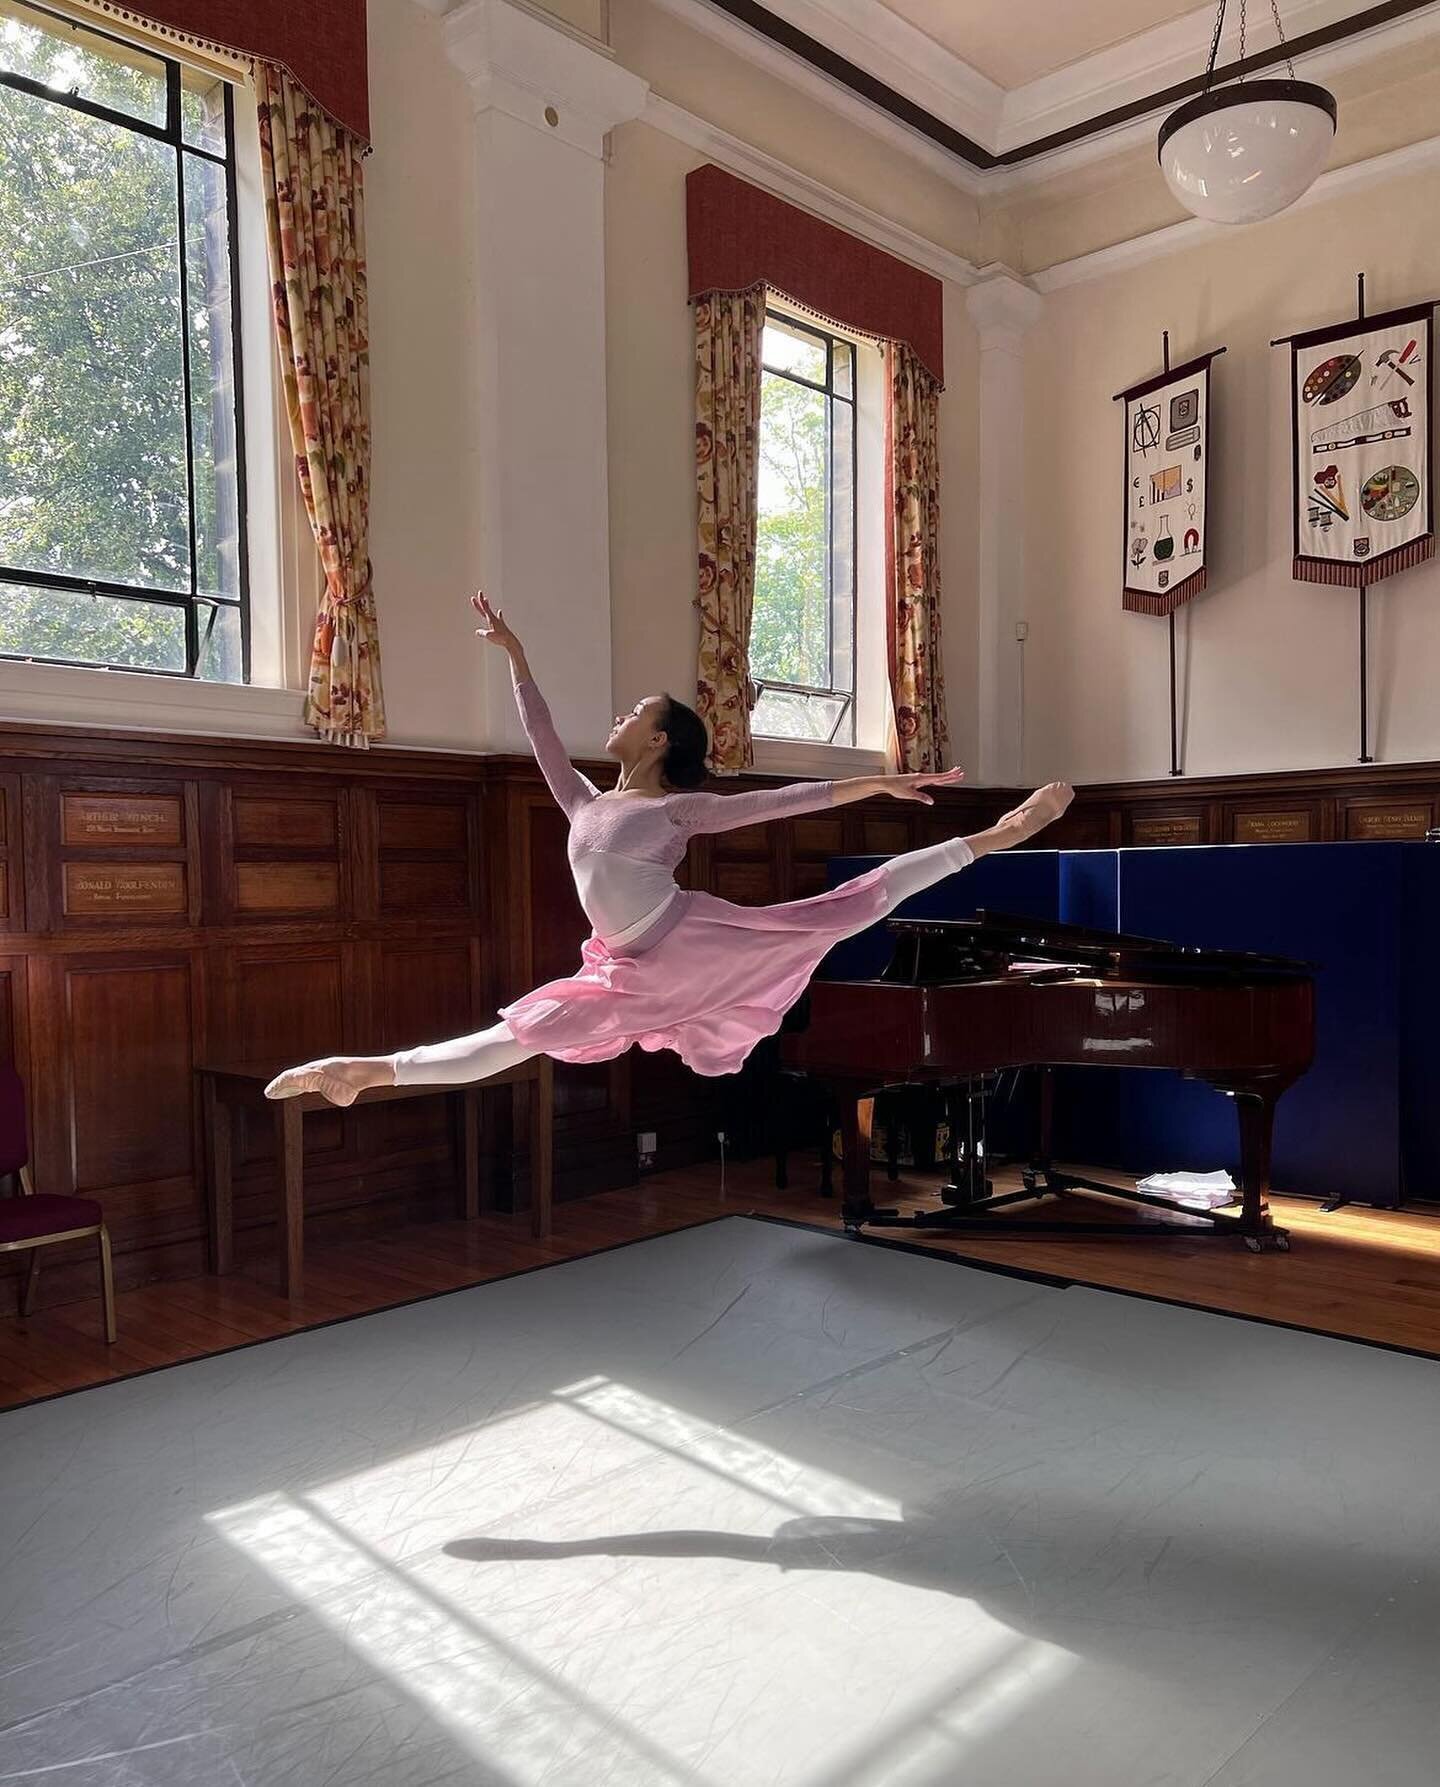 🩷

#browngirlsdoballet #brownballerina #dancephotography 

🩰: @shanimoransimmonds 

Image Description: Dancer is leaping in the air. She is wearing a pink leotard, tights and skirt. She is in a studio with wooden walls, two windows and a grand pian